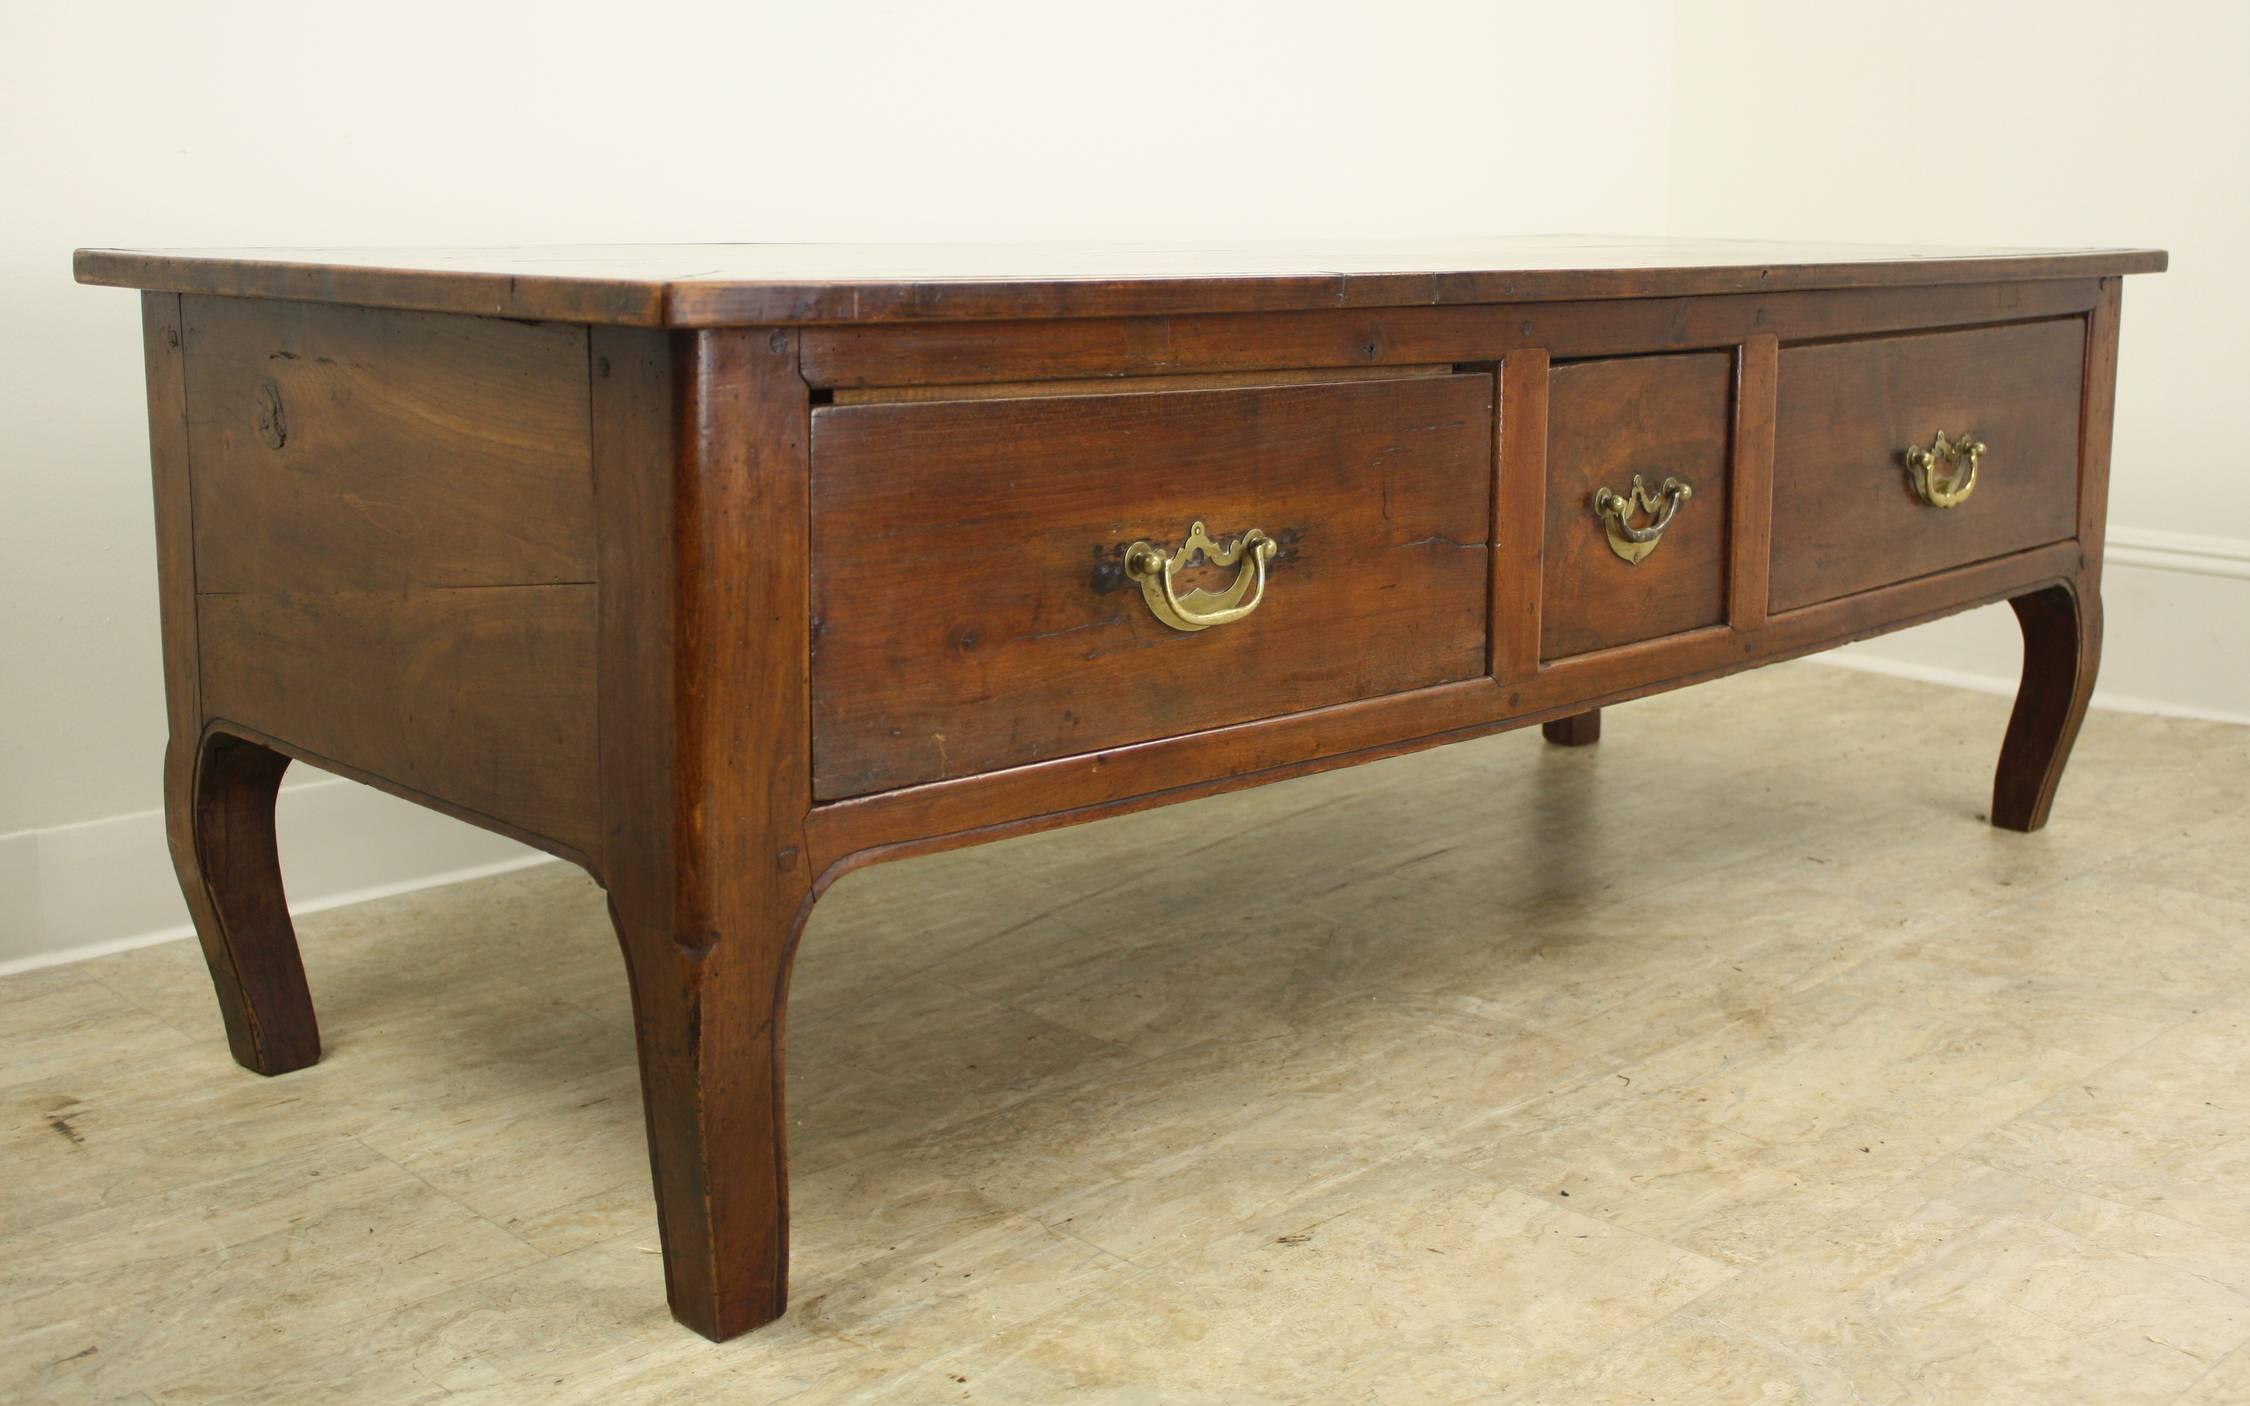 There is a lot to love about this graceful coffee table in warm cherry. The top has both Fine carpentry detail such as mitred corners and neat trim, with interesting old distress. The body of the piece boasts three deep roomy drawers with solid